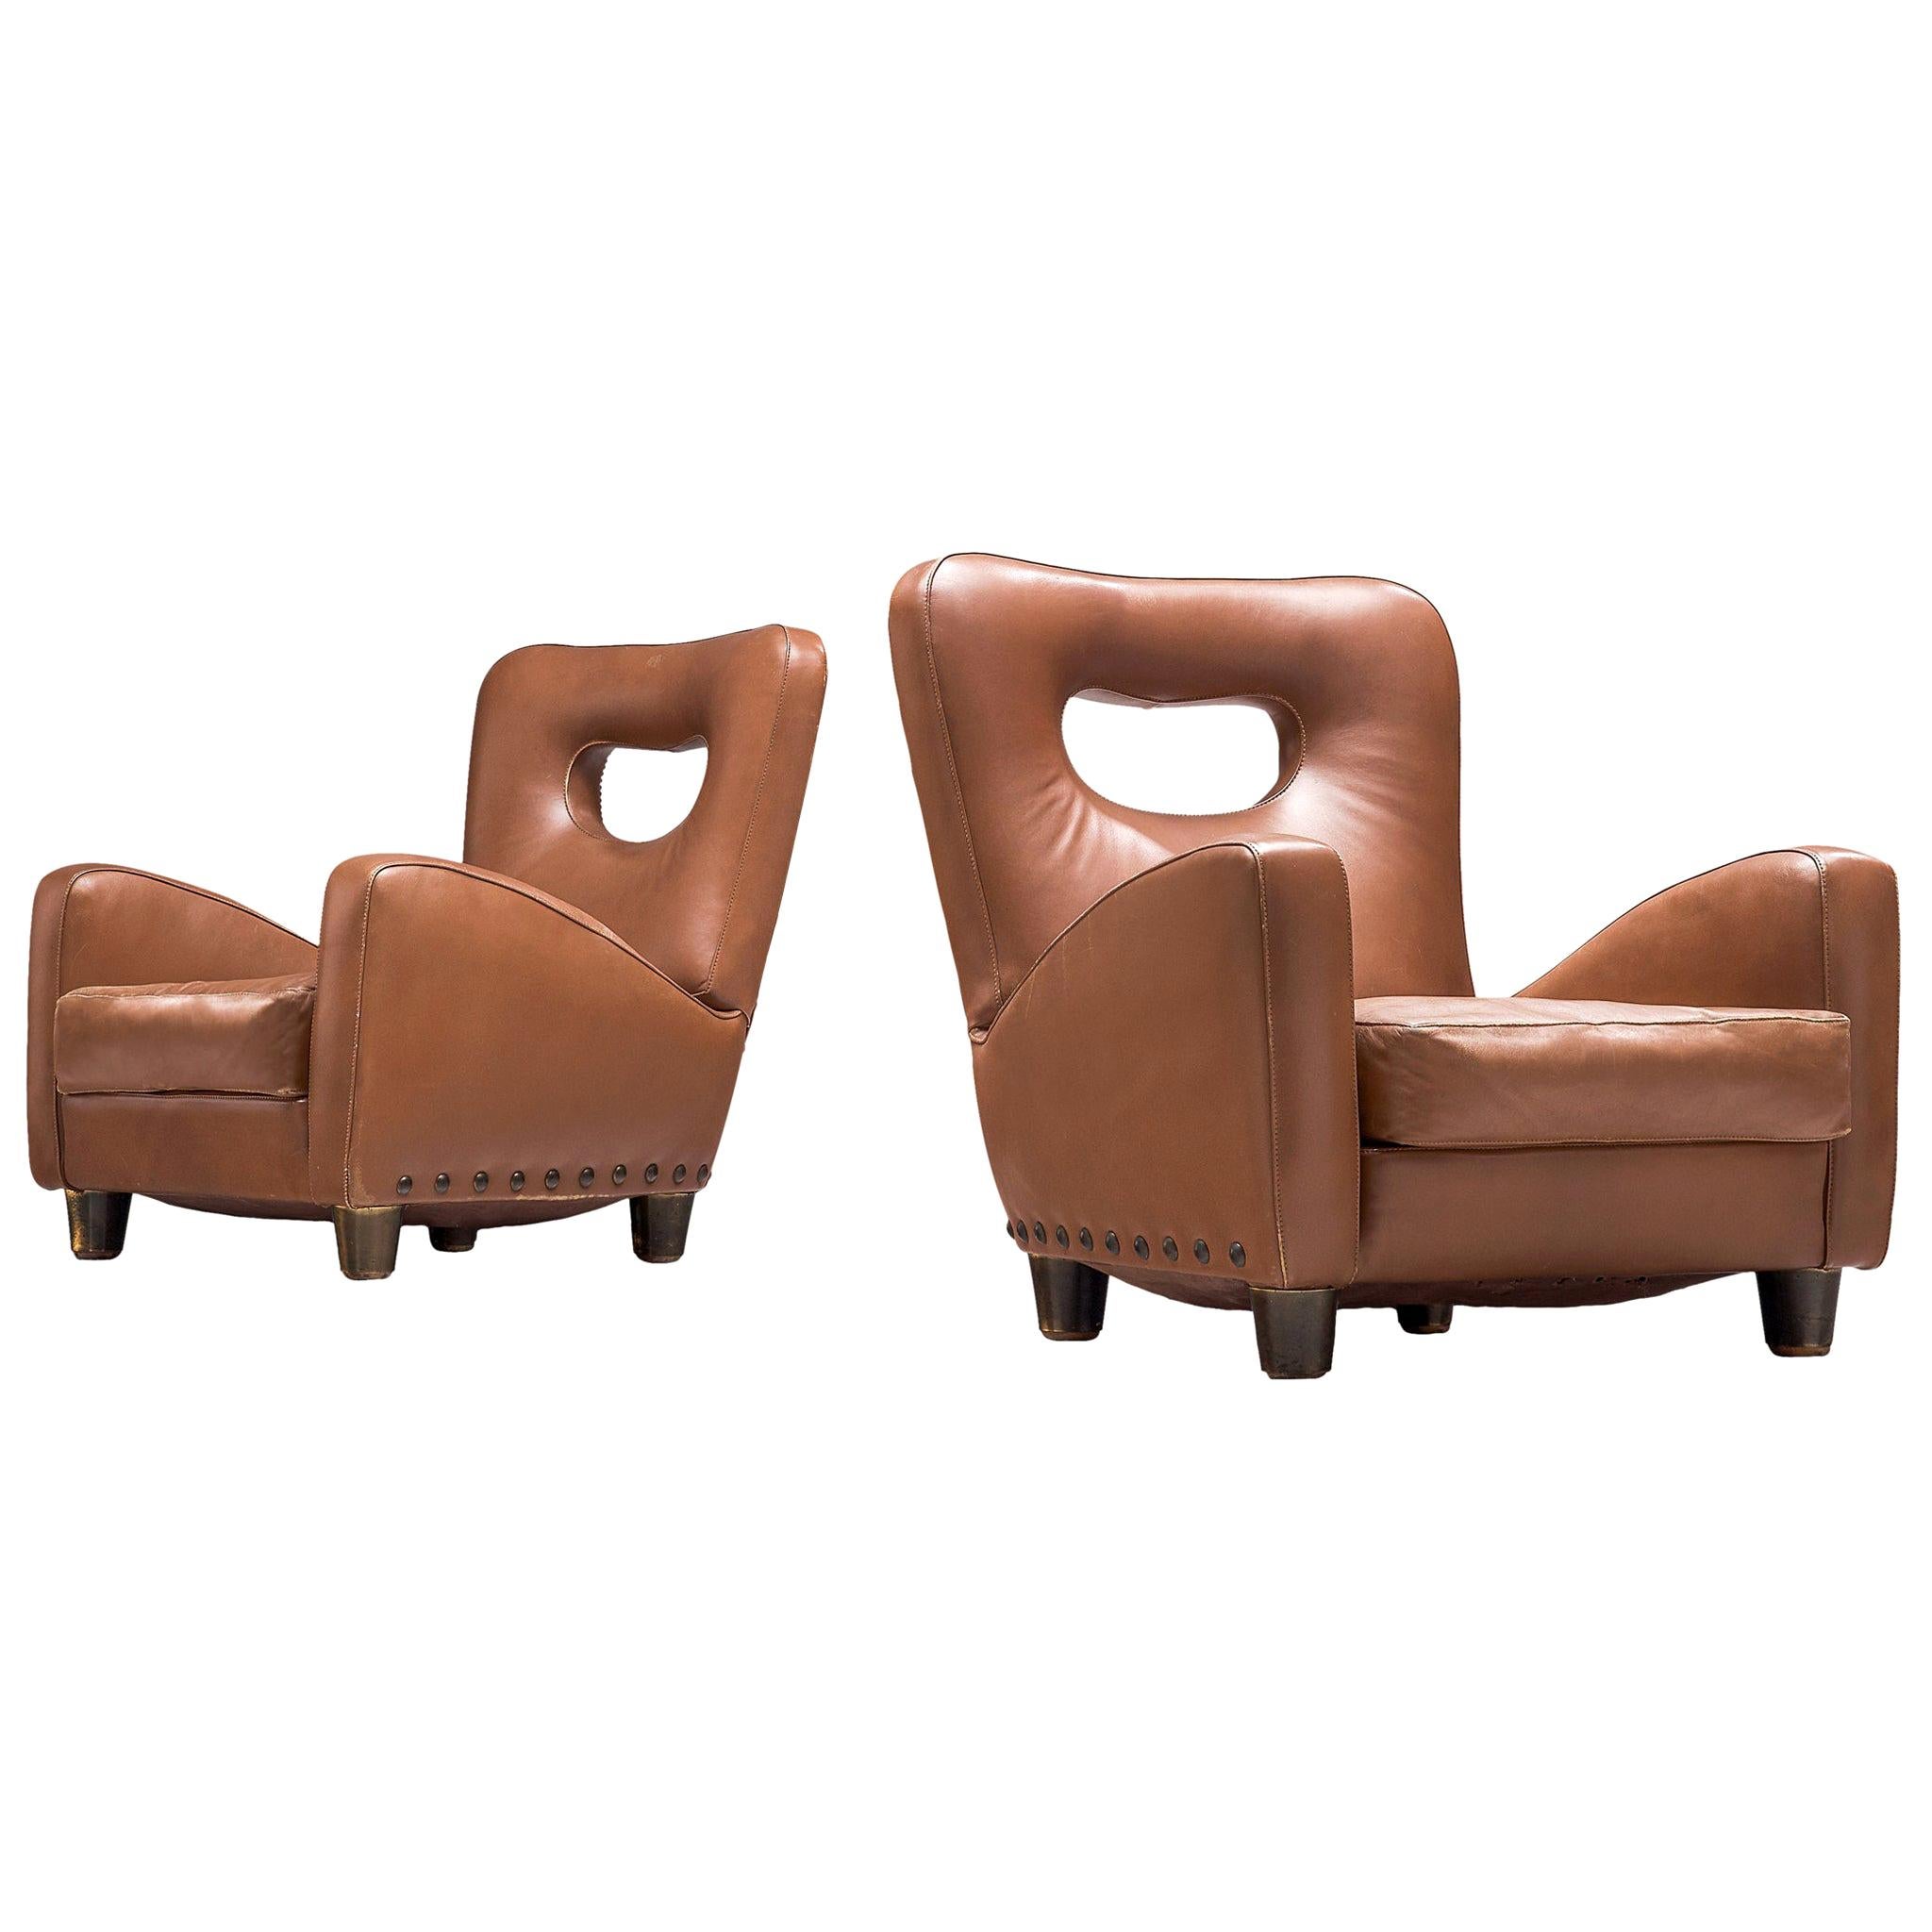 Pair of Lounge Chairs by Giovanni Gariboldi